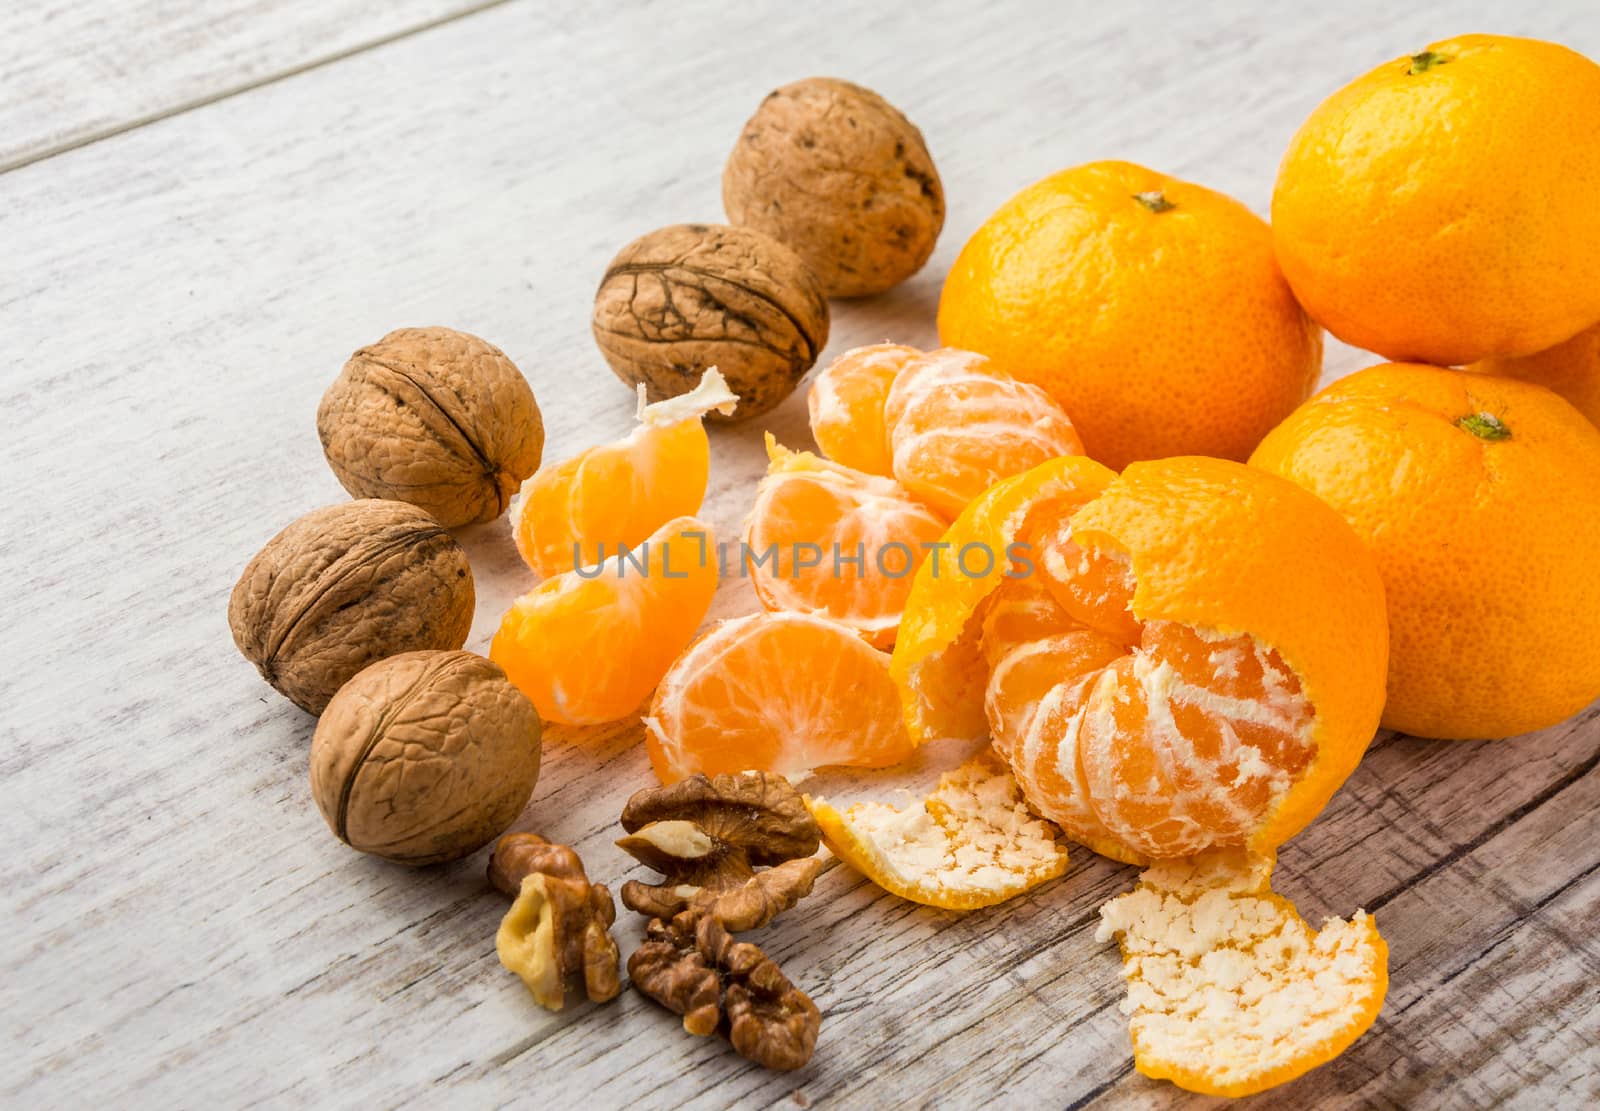 tangerines, peeled tangerine, tangerine slices and walnuts on a white wooden table